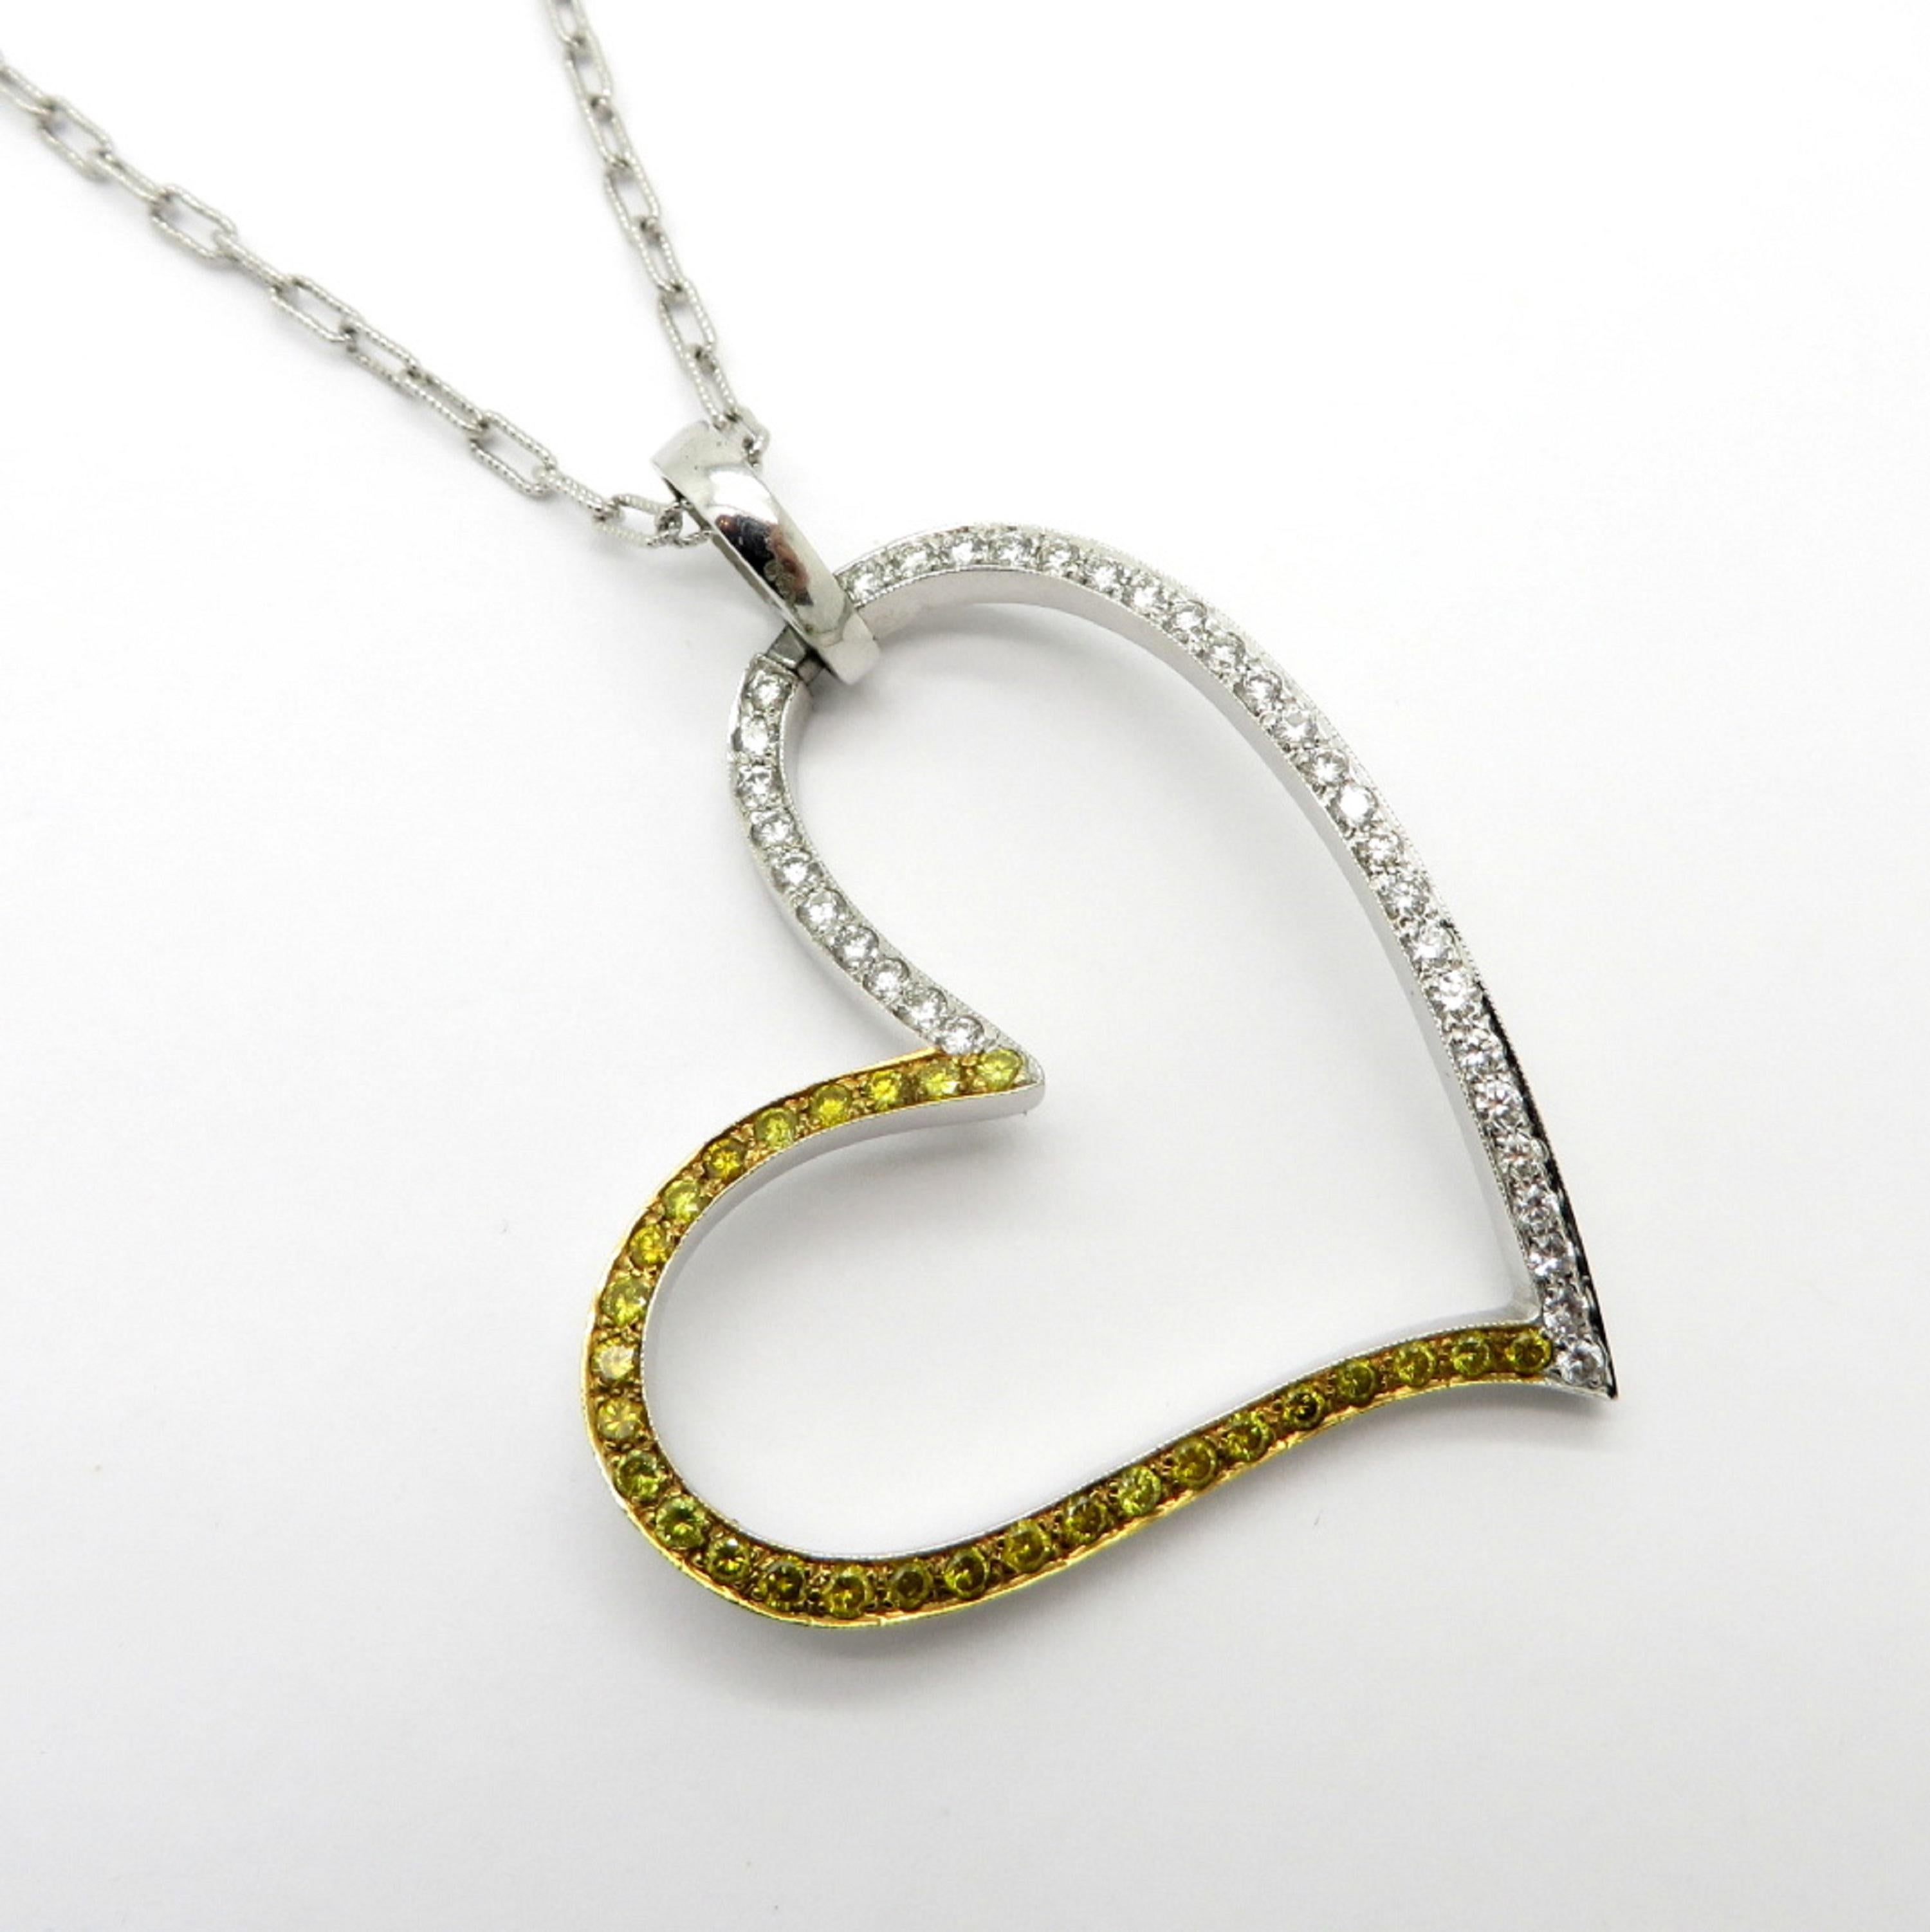 Estate 18K white gold diamond and fancy yellow round diamond large heart pendant necklace. Showcasing 35 white round brilliant cut diamonds weighing approximately 0.50 carats. Accented with 20 fancy radiated yellow round brilliant cut diamonds